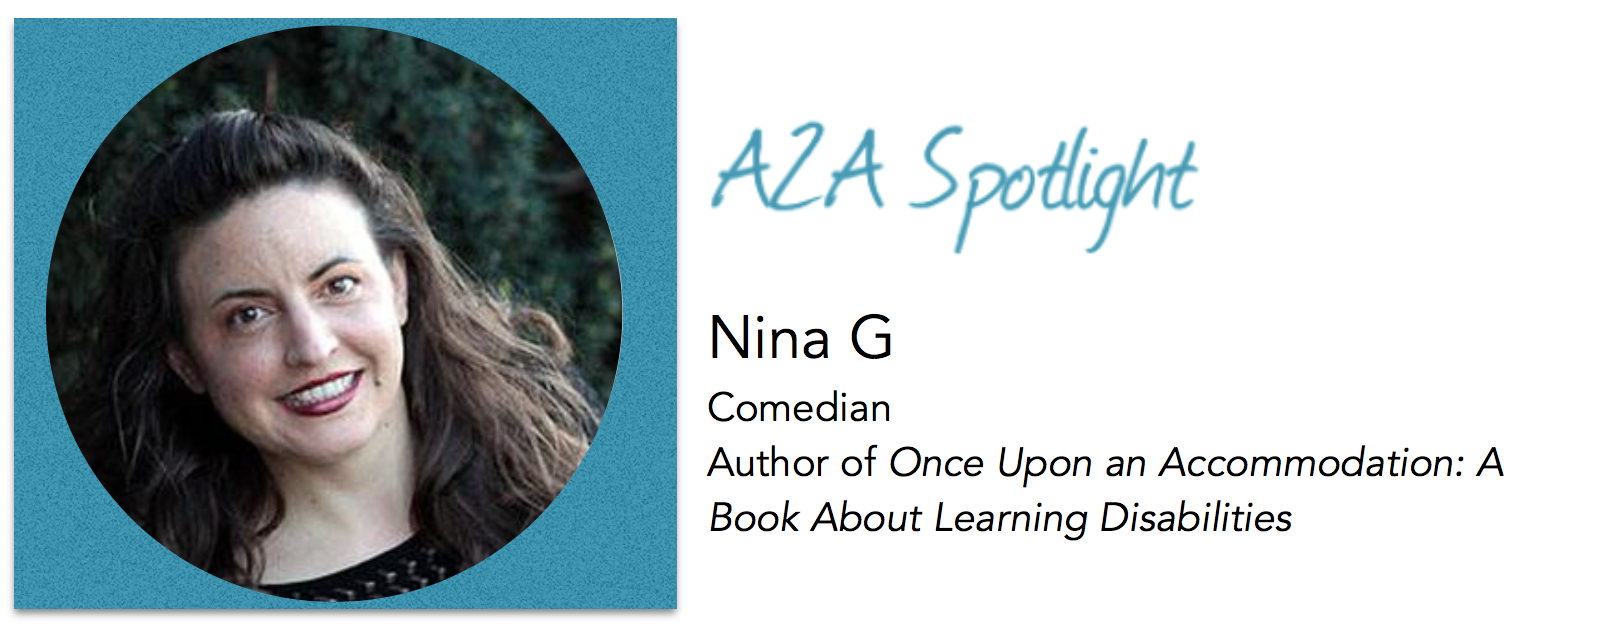 Spotlight – Stuttering Comedian Nina G Turns Her Adversity Into a “Laughing” Matter